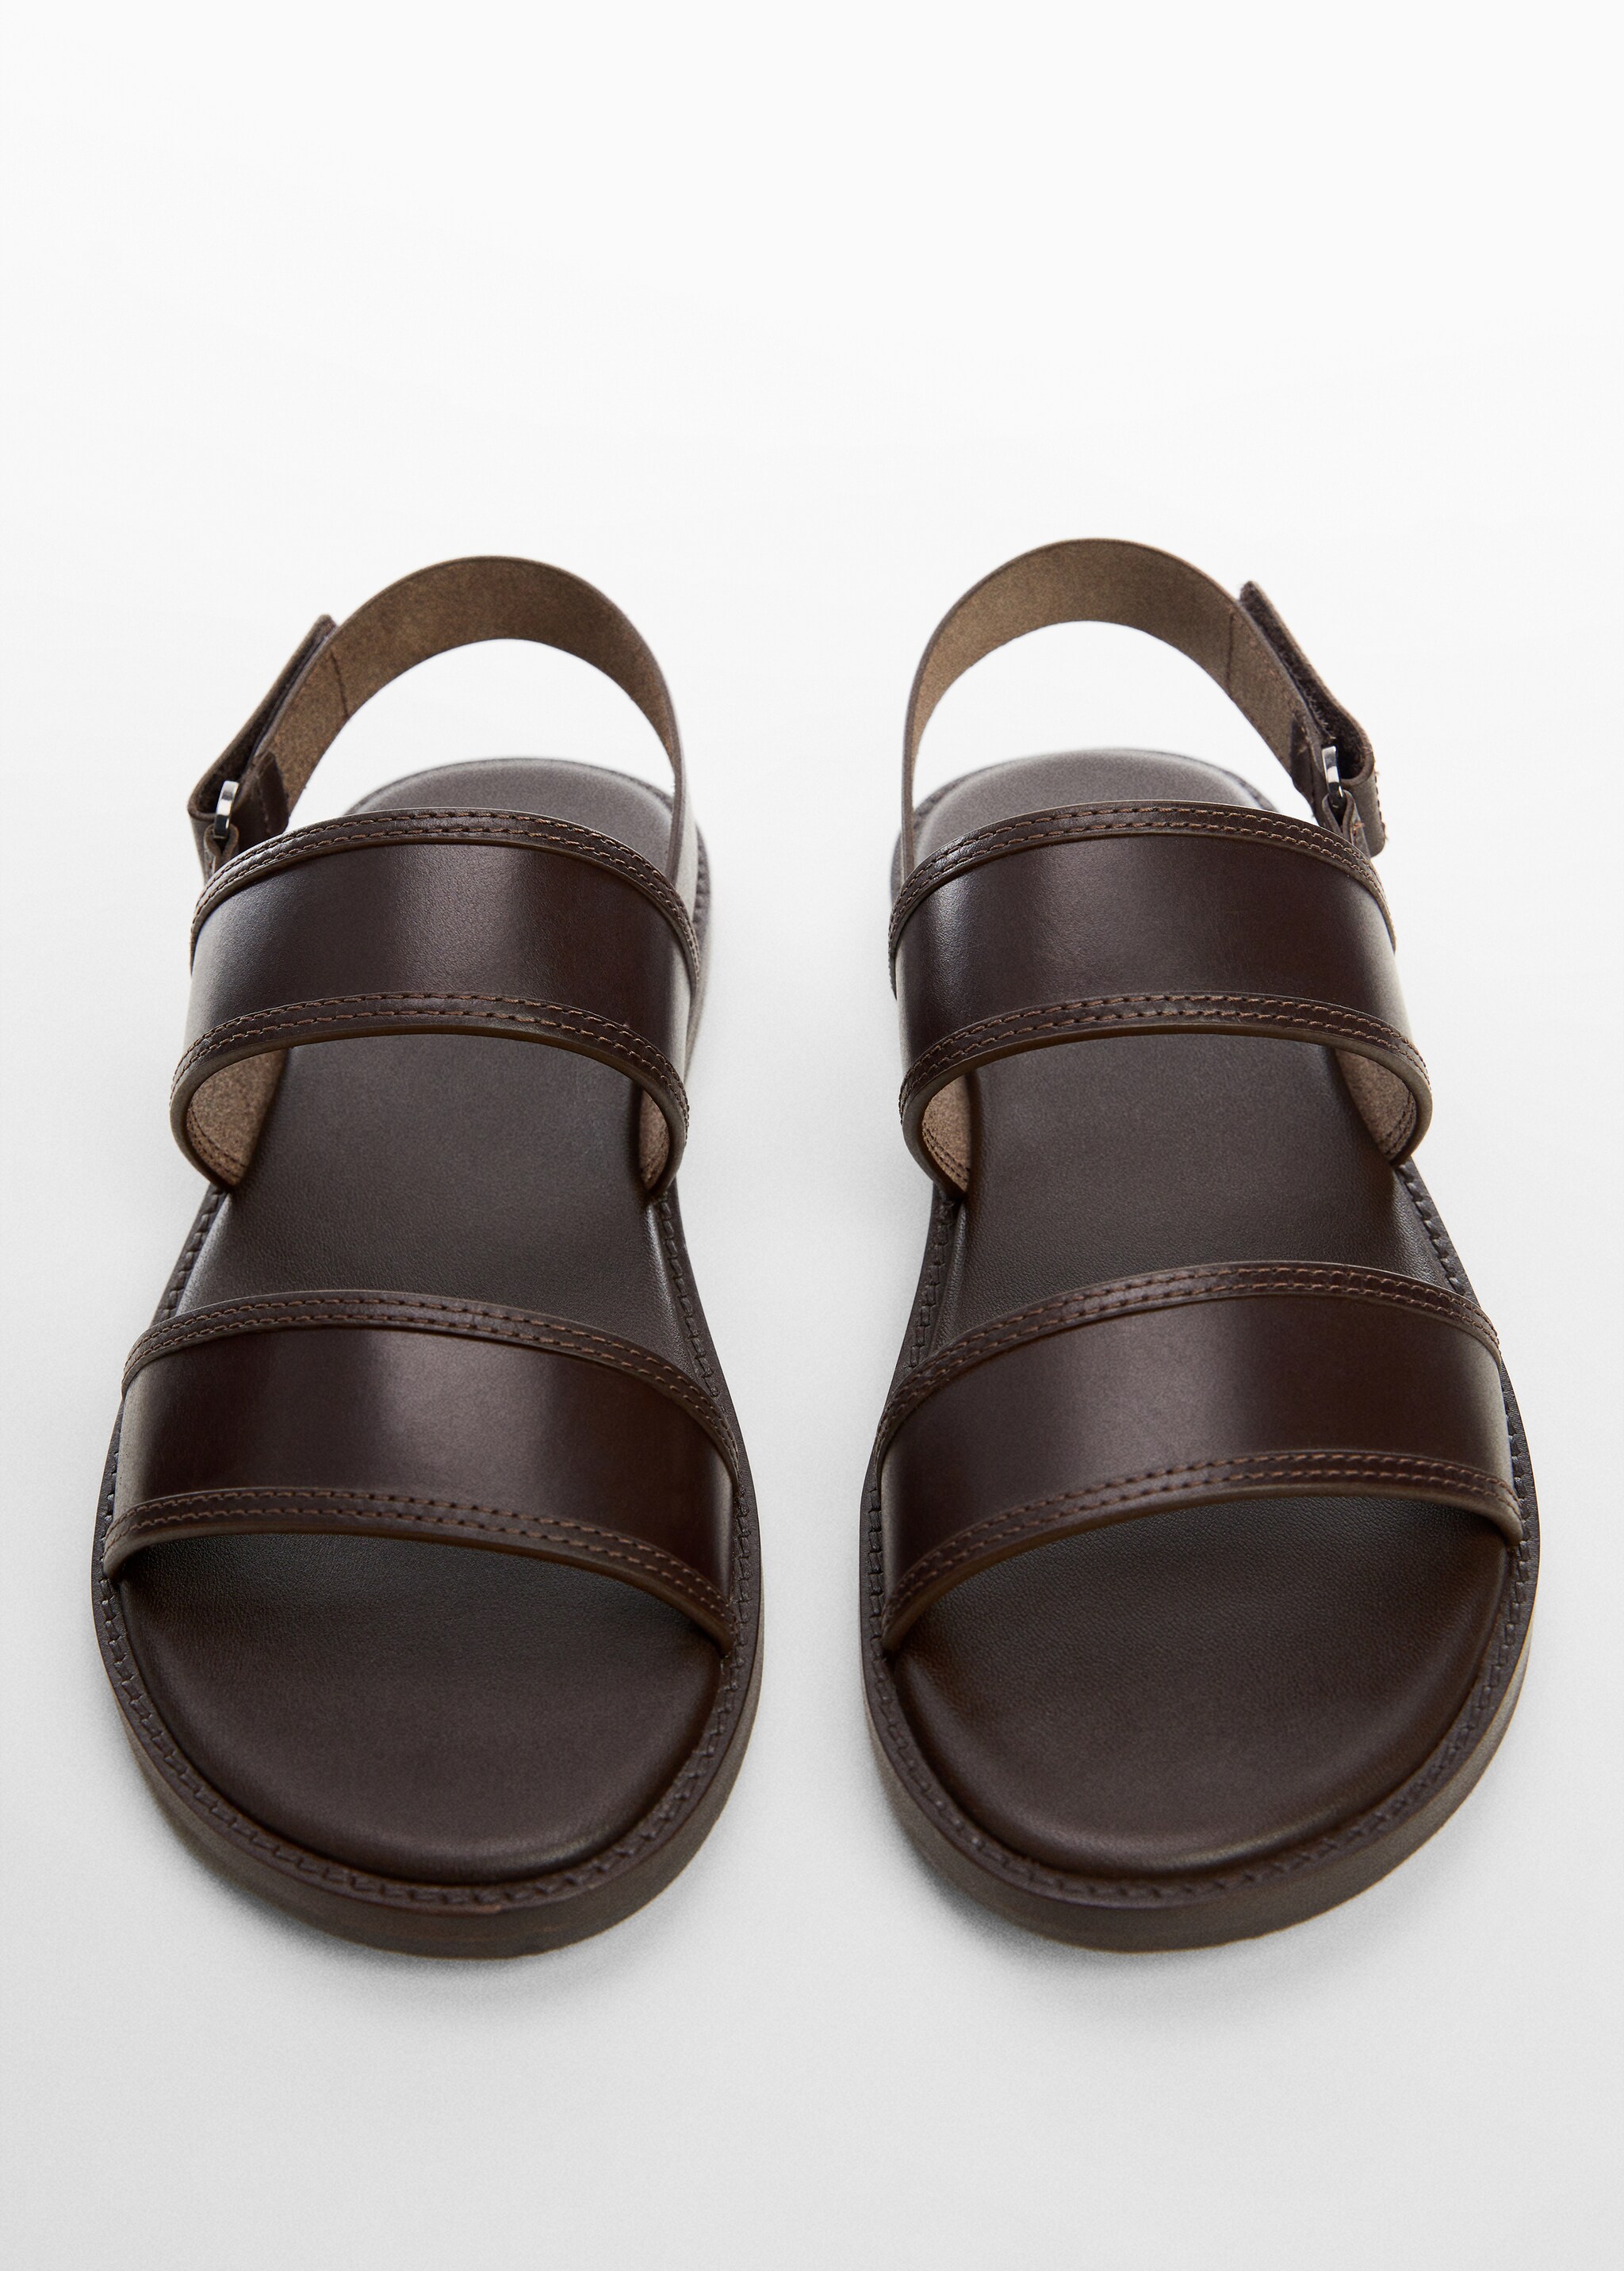 100% leather strap sandal - Details of the article 2